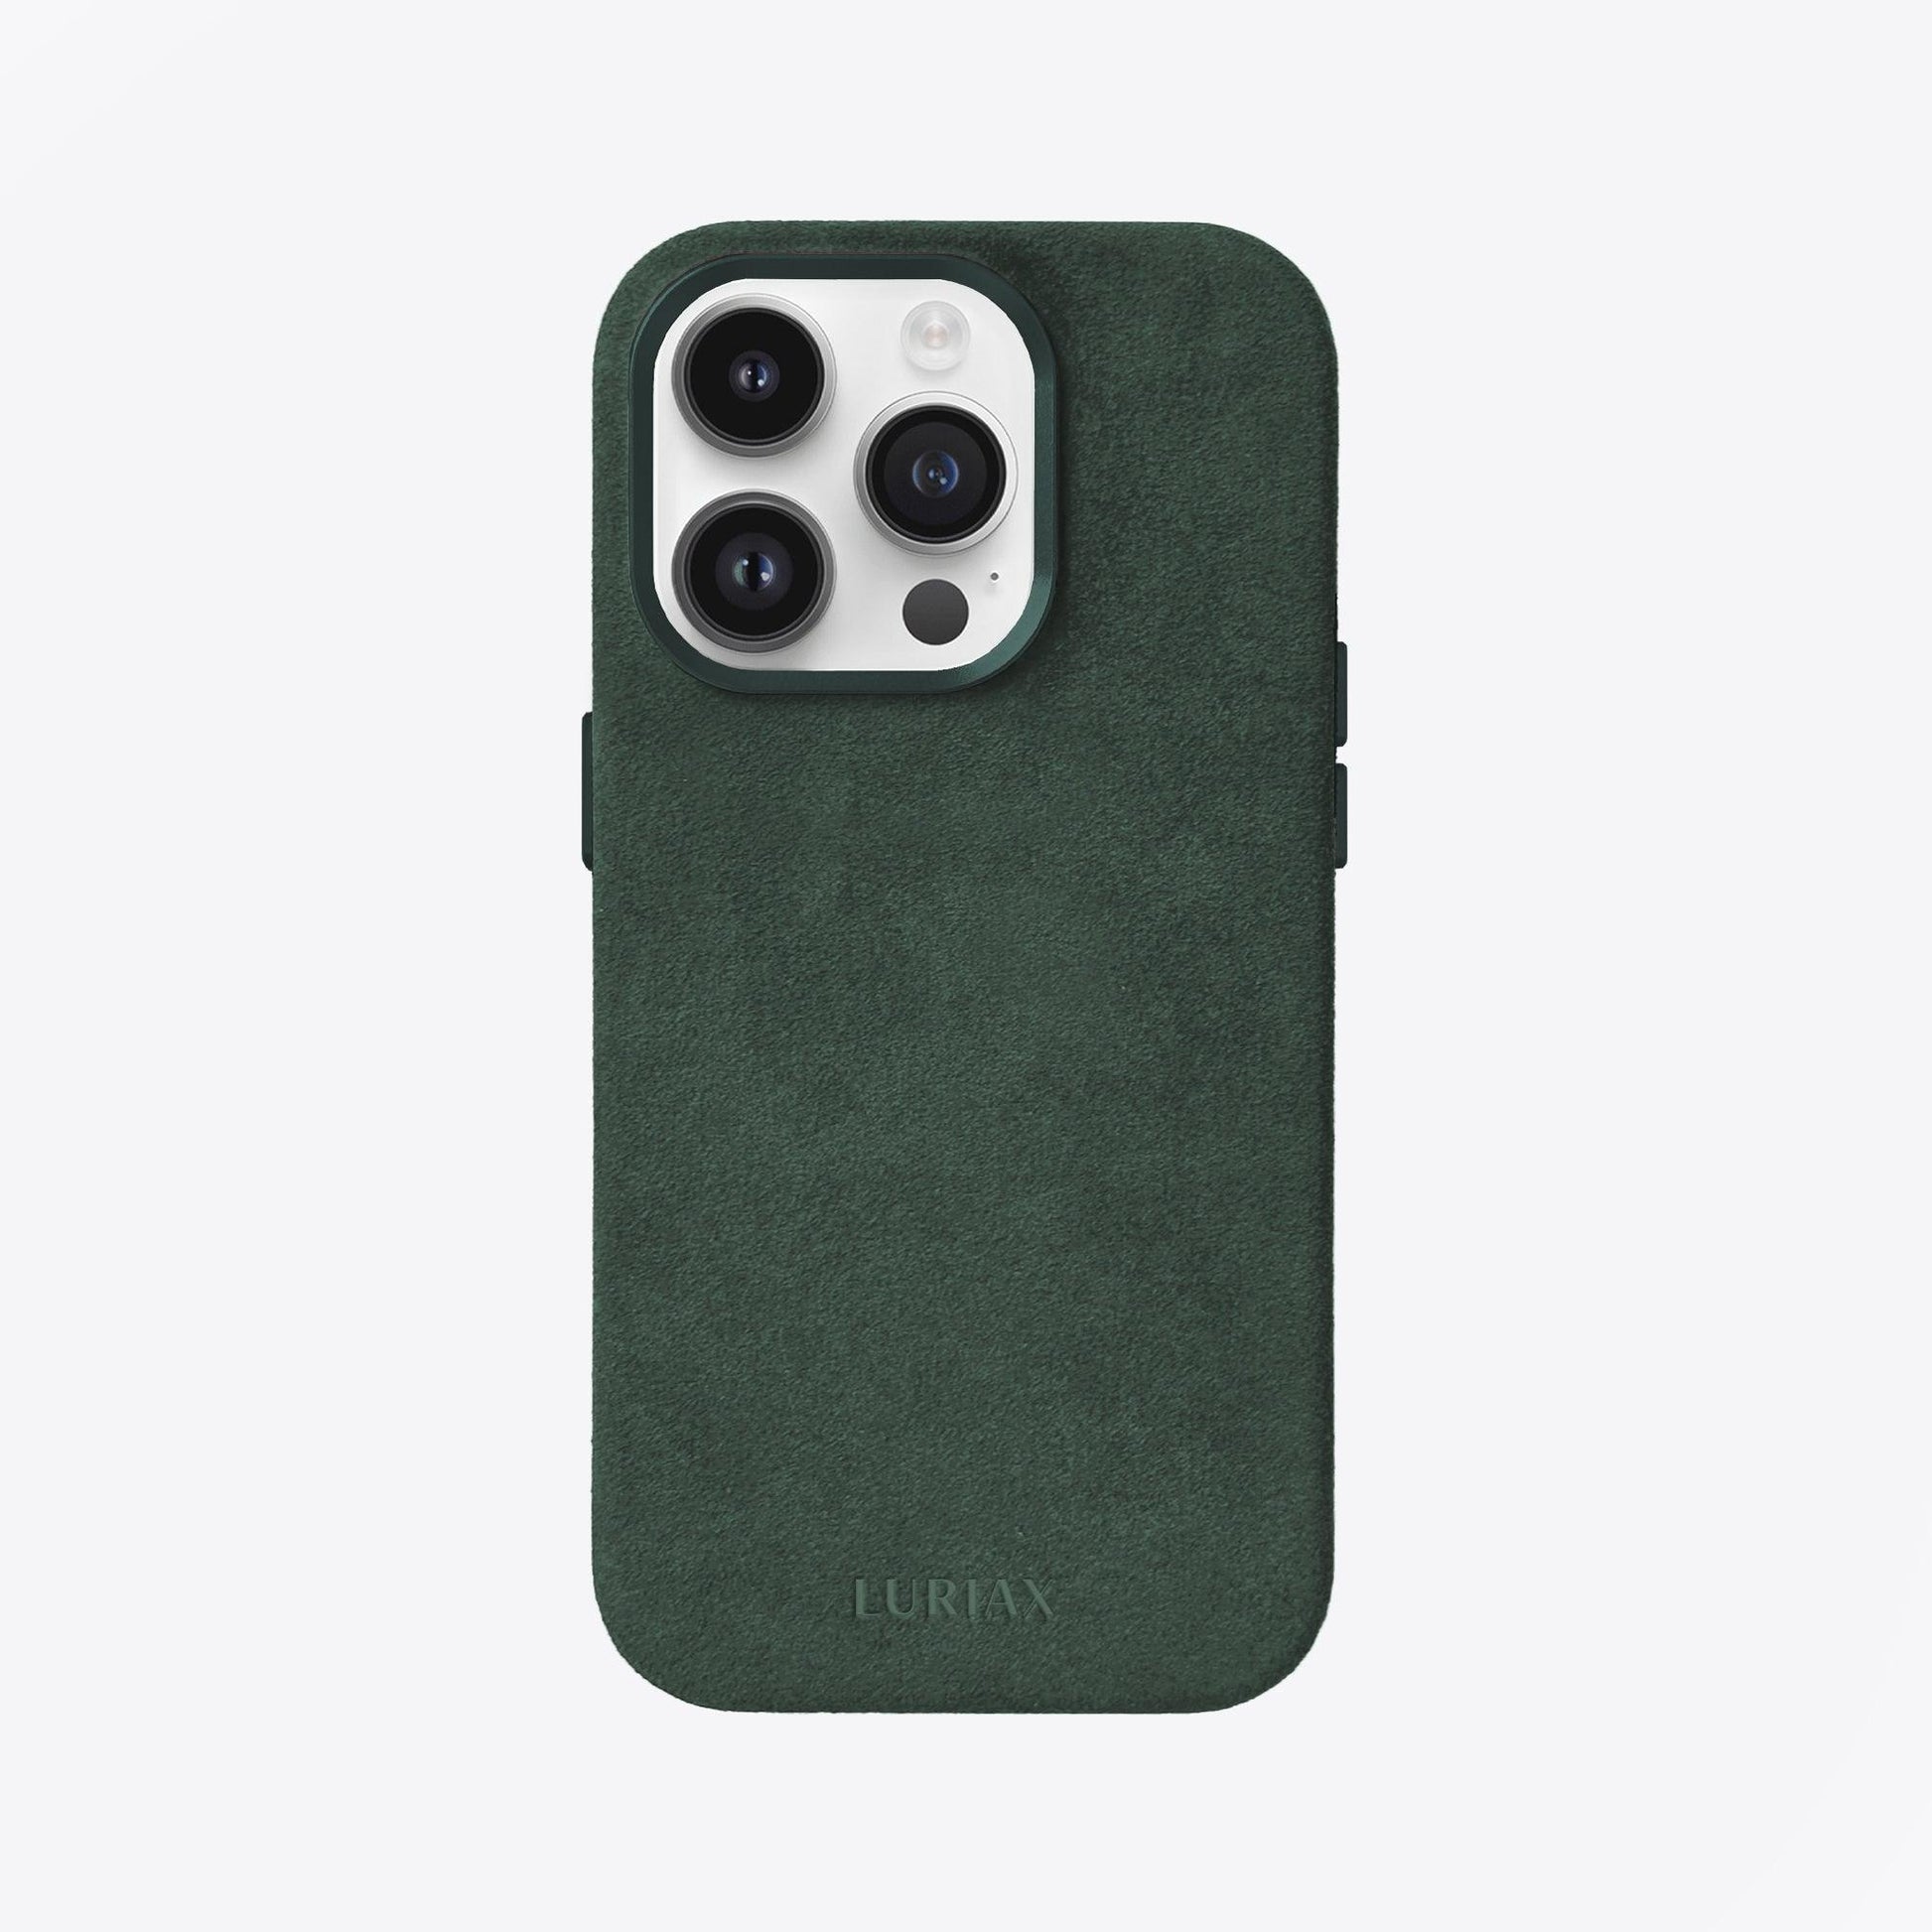 Alcantara Suede Leather iPhone Case and Accessories Collection - The Classic iPhone Case - Midnight Green - Luriax